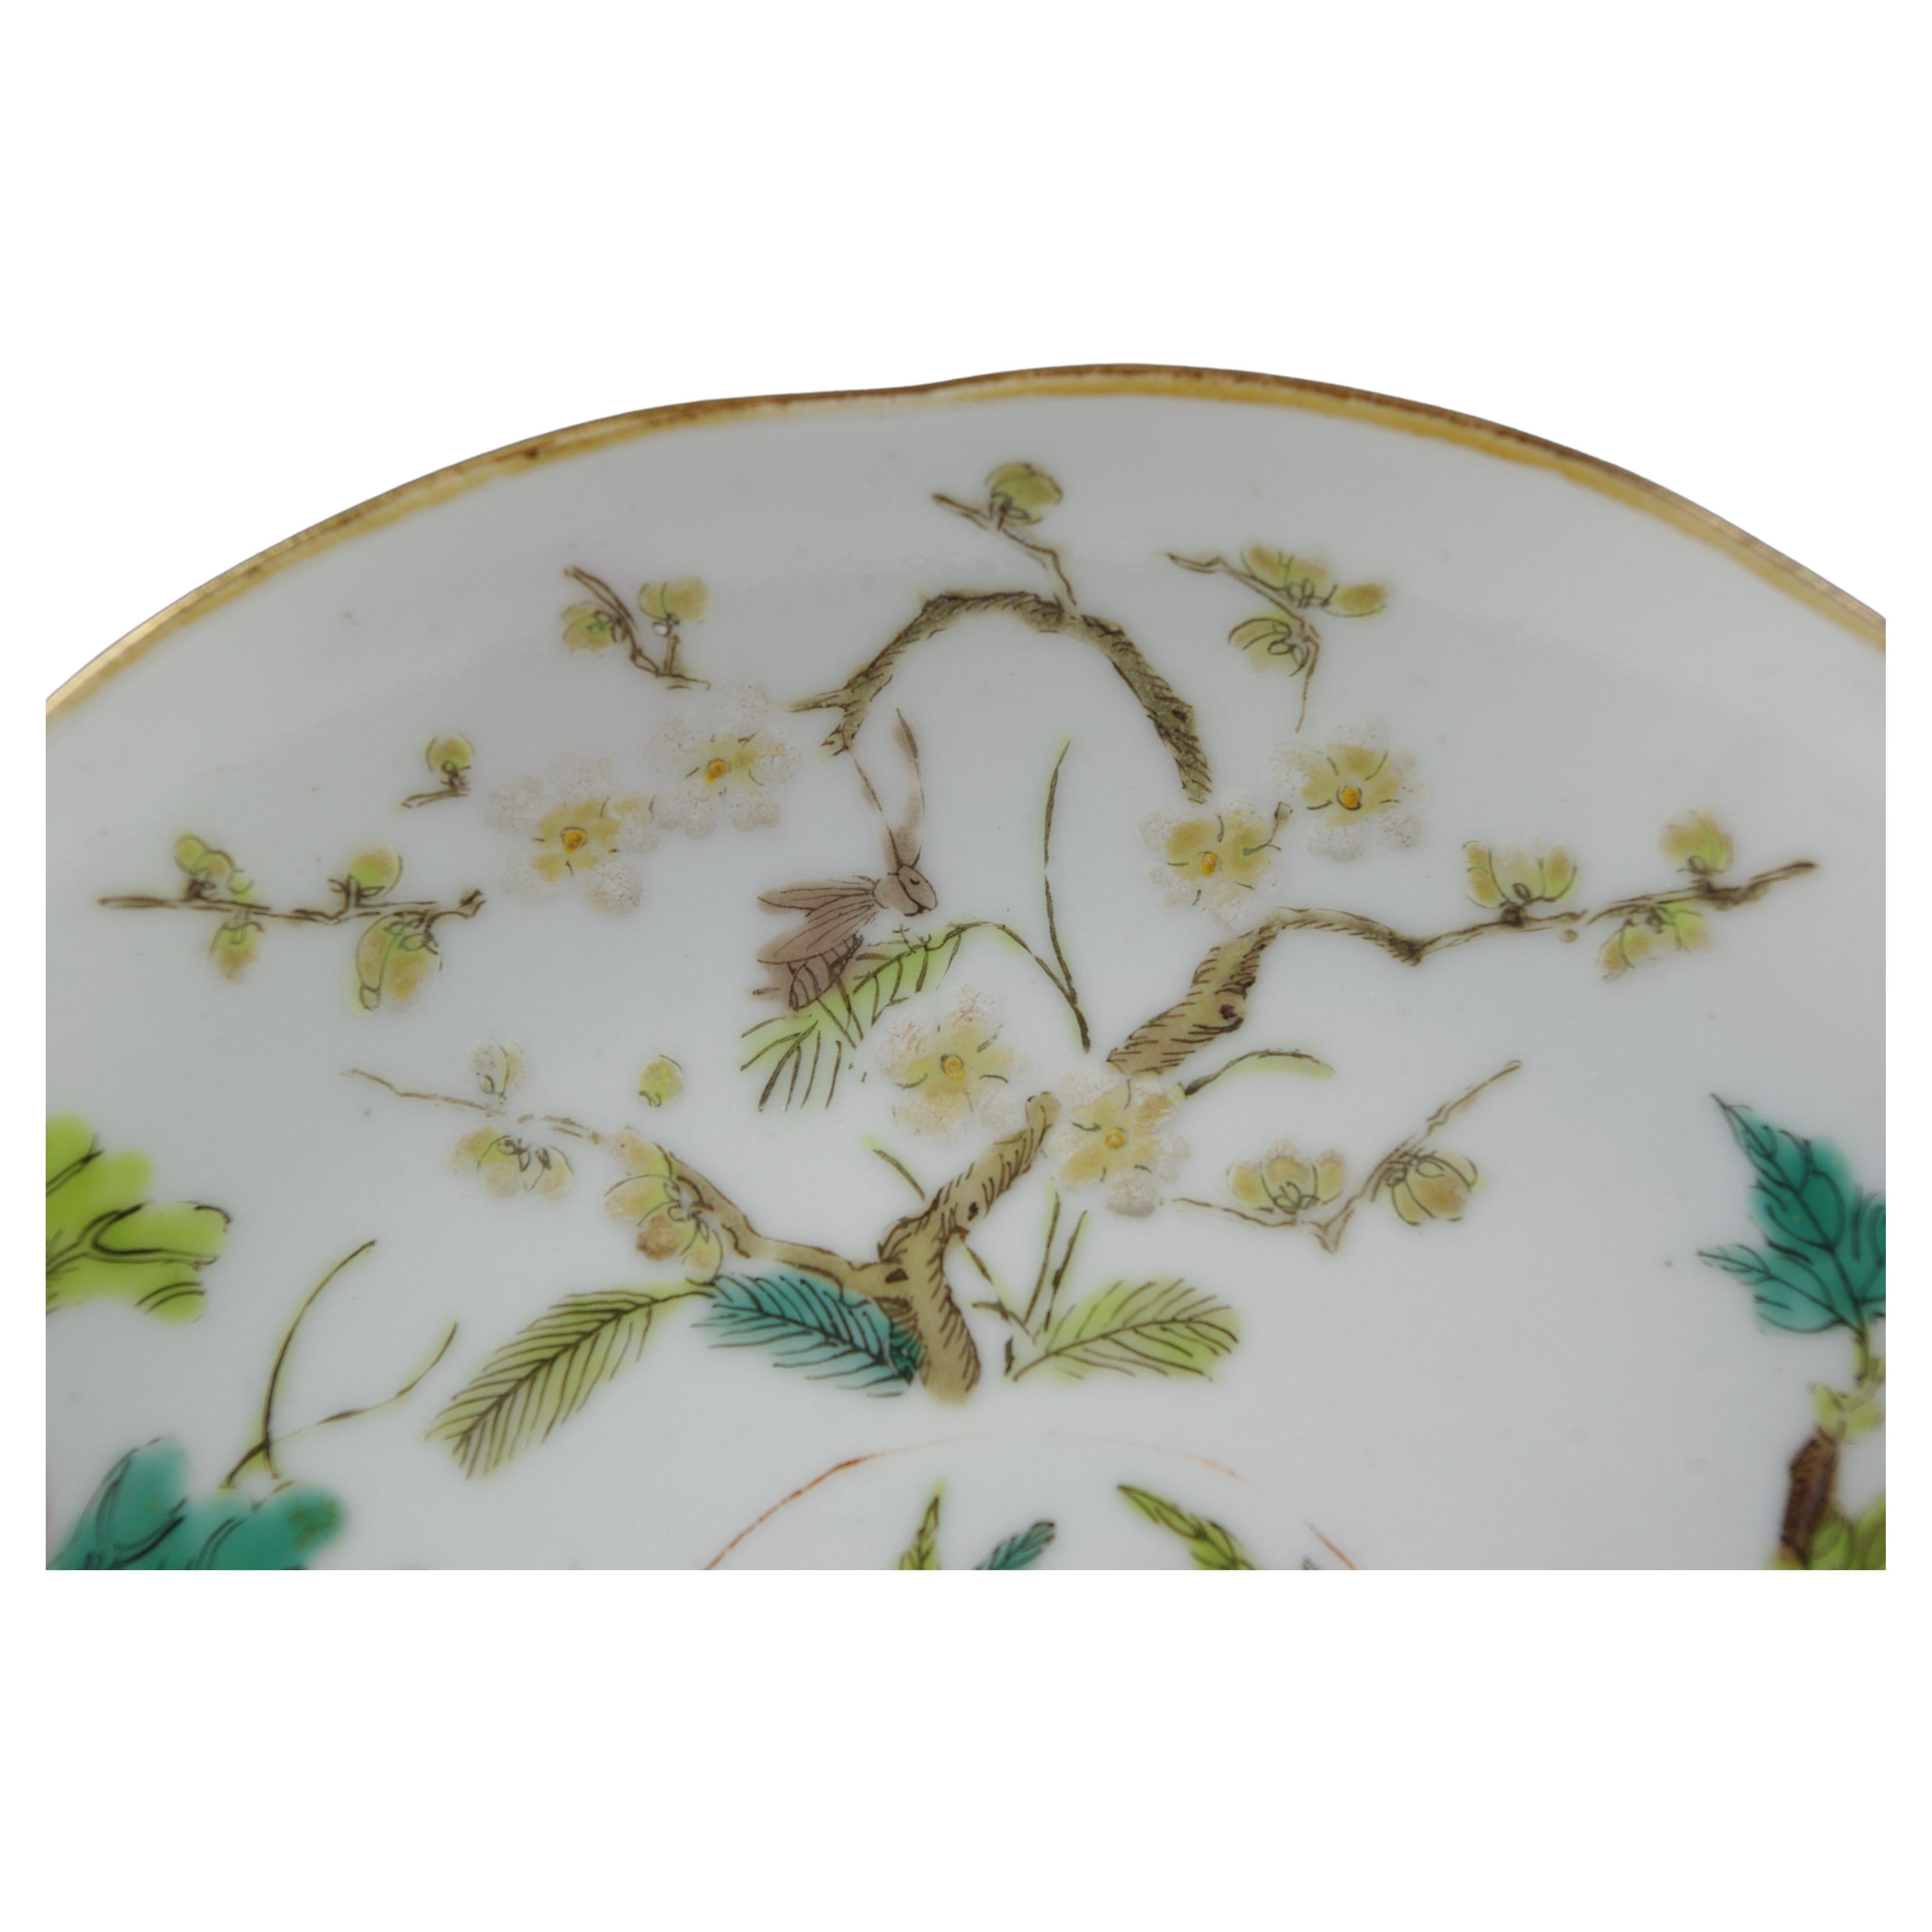 Qing Antique Chinese Porcelain Famille Rose Fencai Saucer Dish 5 Flowers Daoguang 19c For Sale